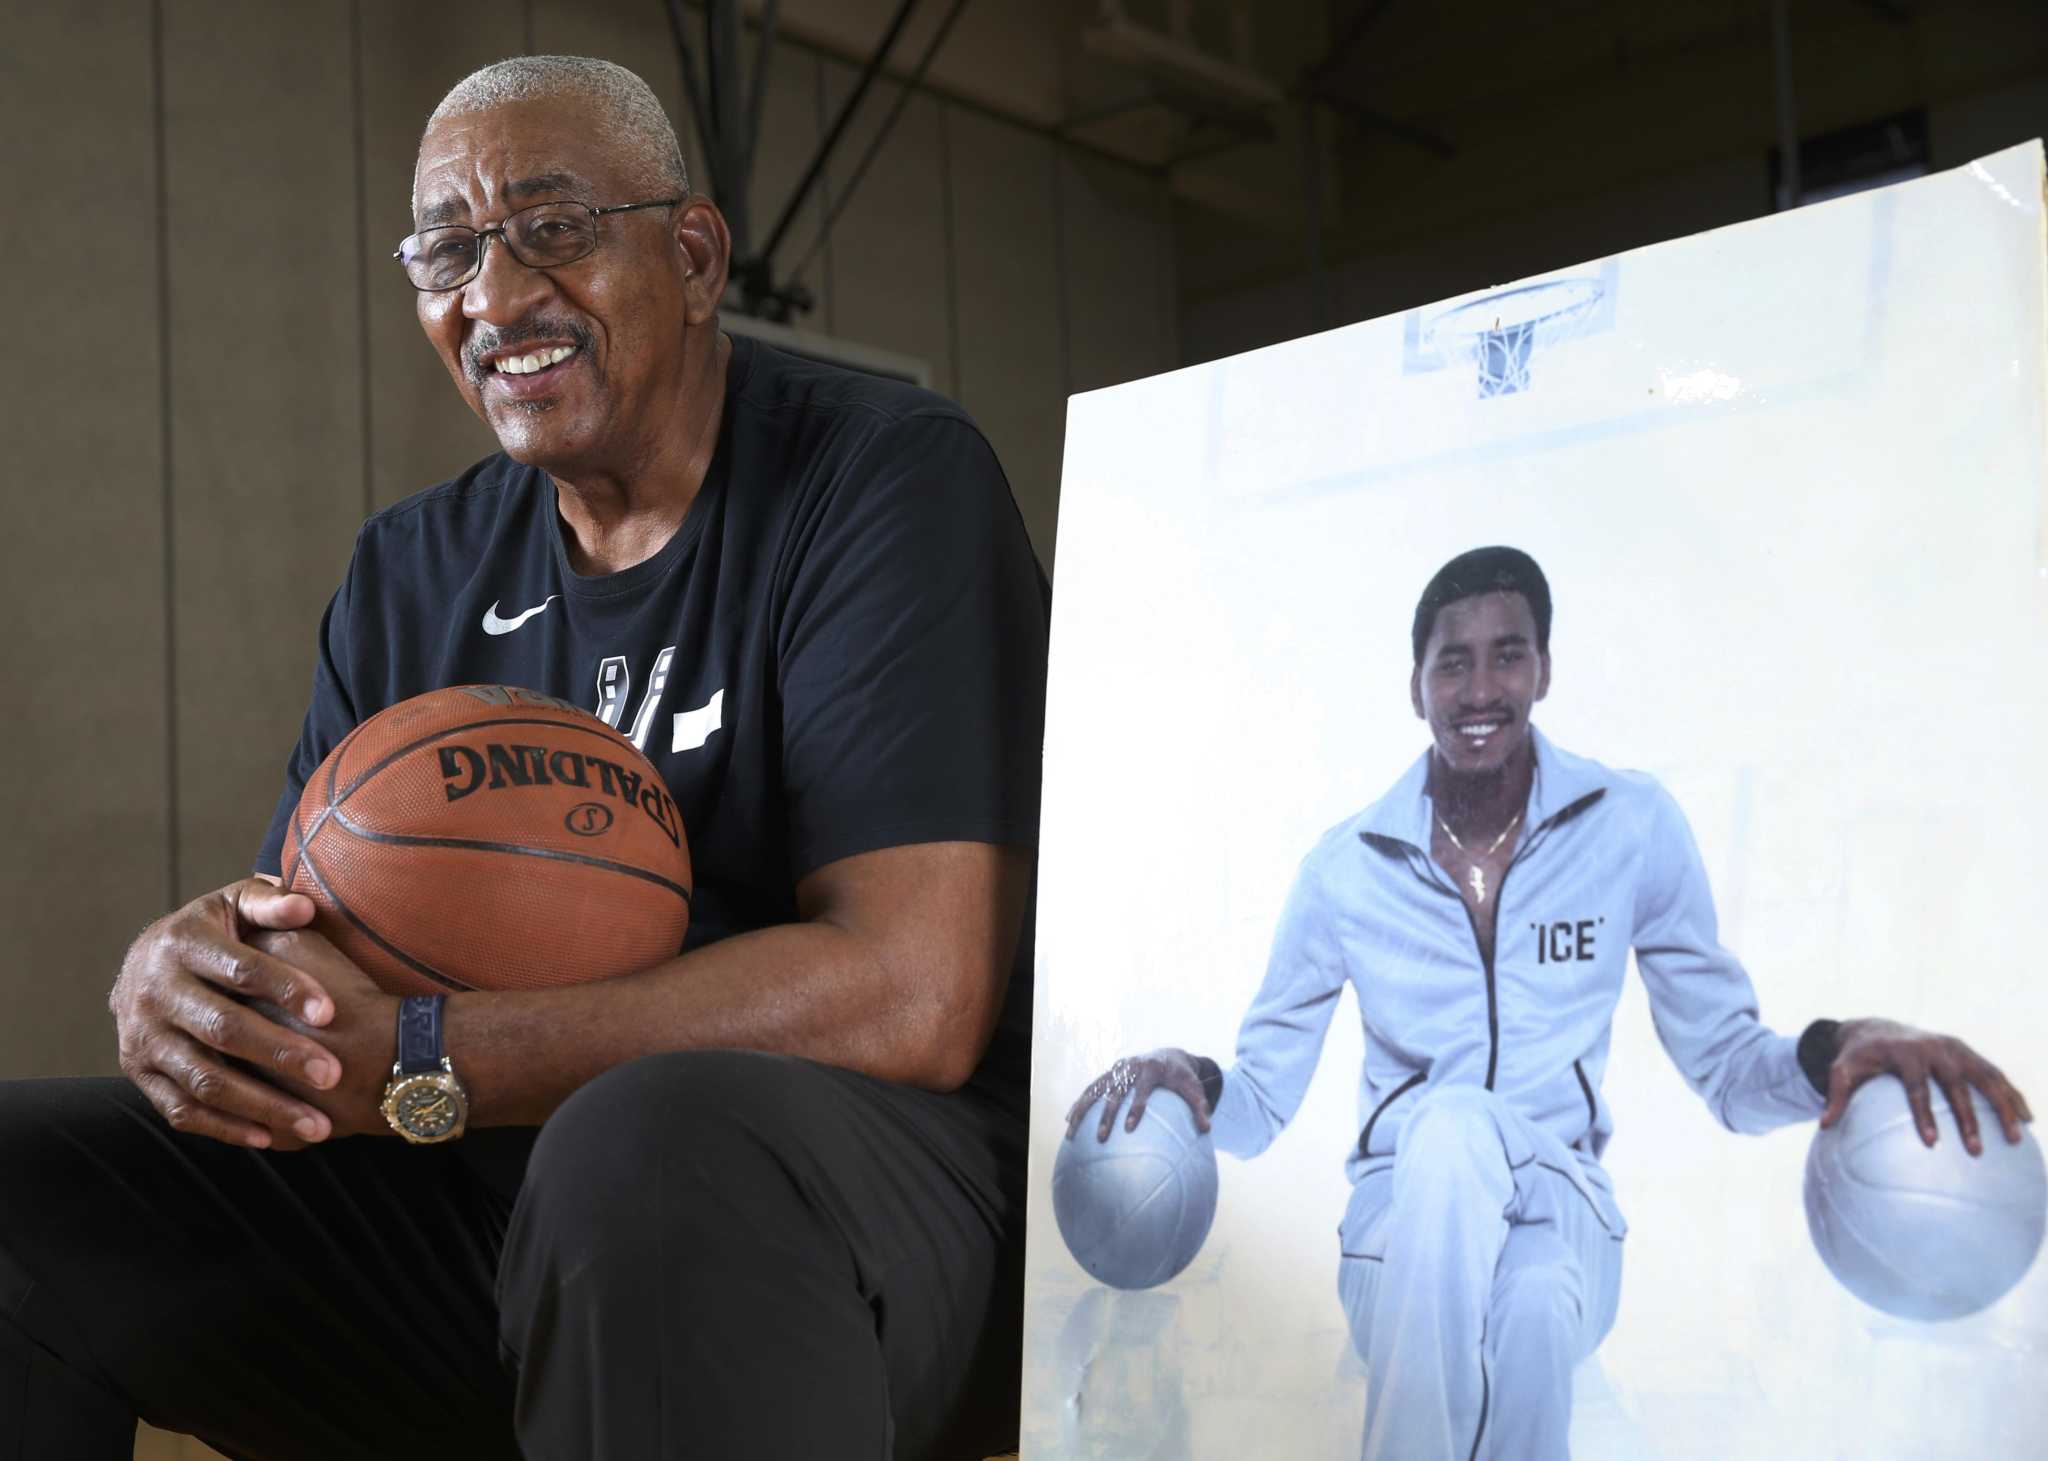 Spurs launch clothing line based on Nike poster of George Gervin